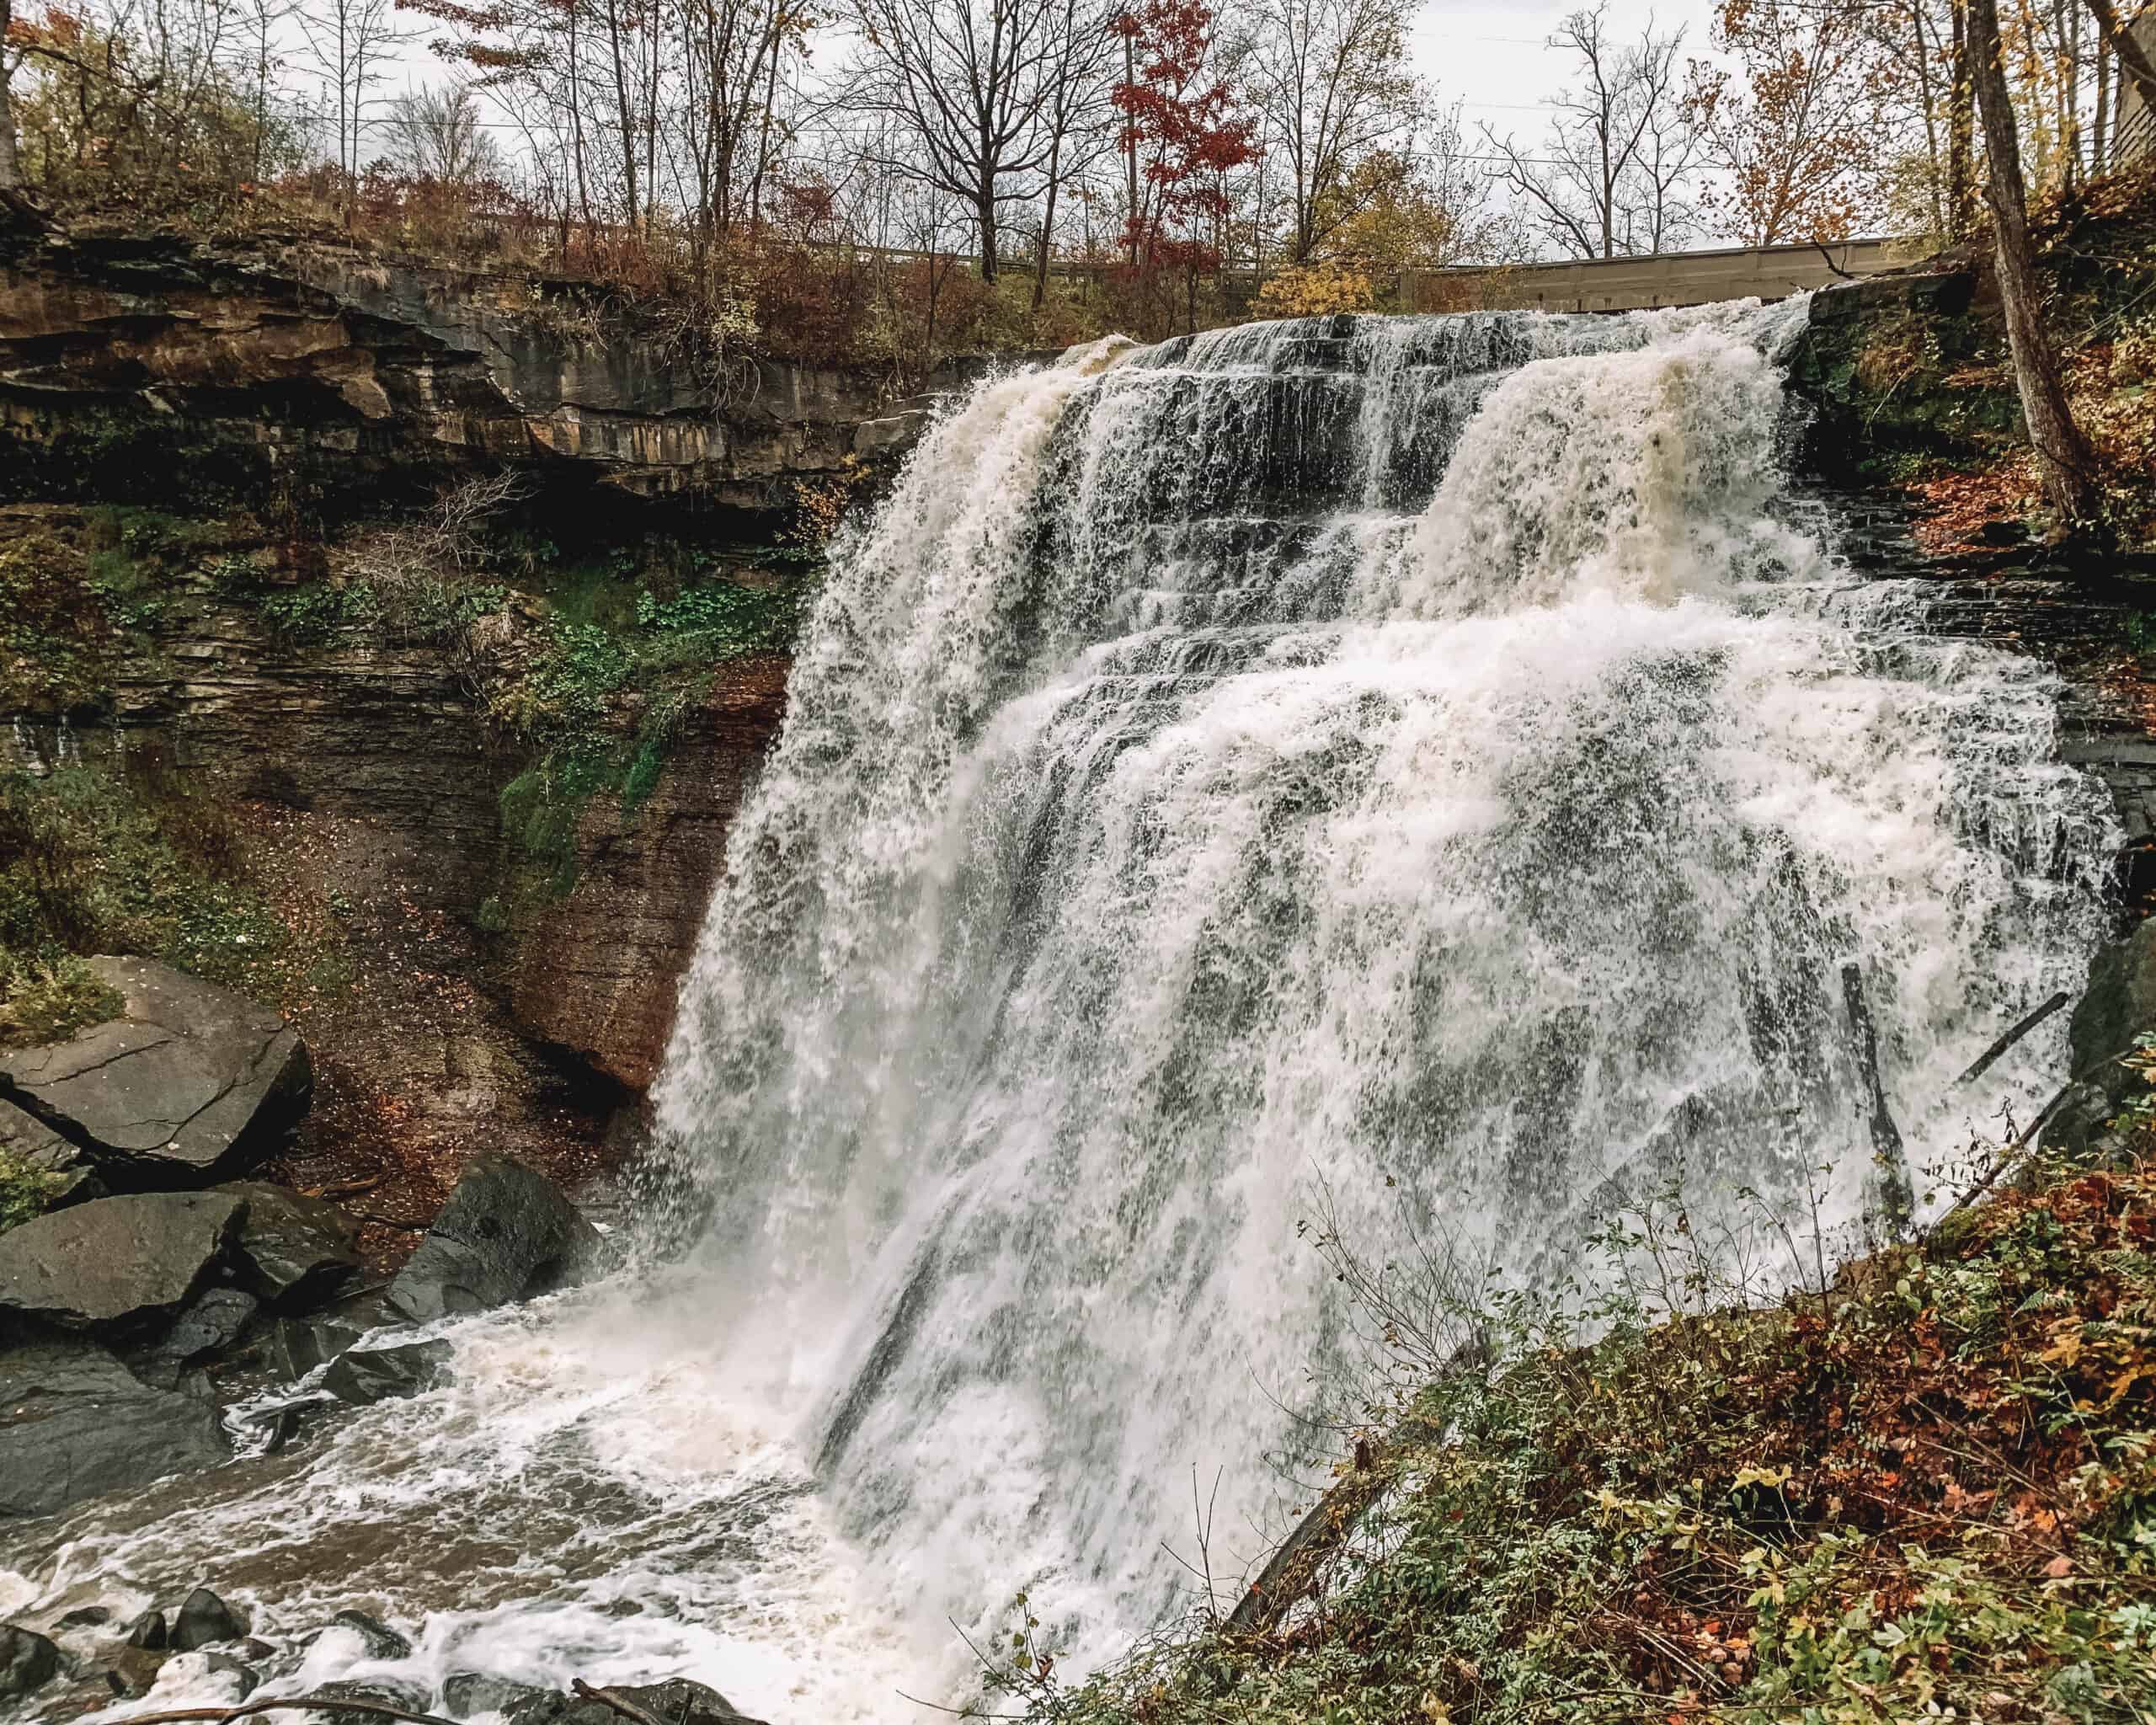 Brandywine Falls is the largest and most popular Cuyahoga Valley National Park waterfall